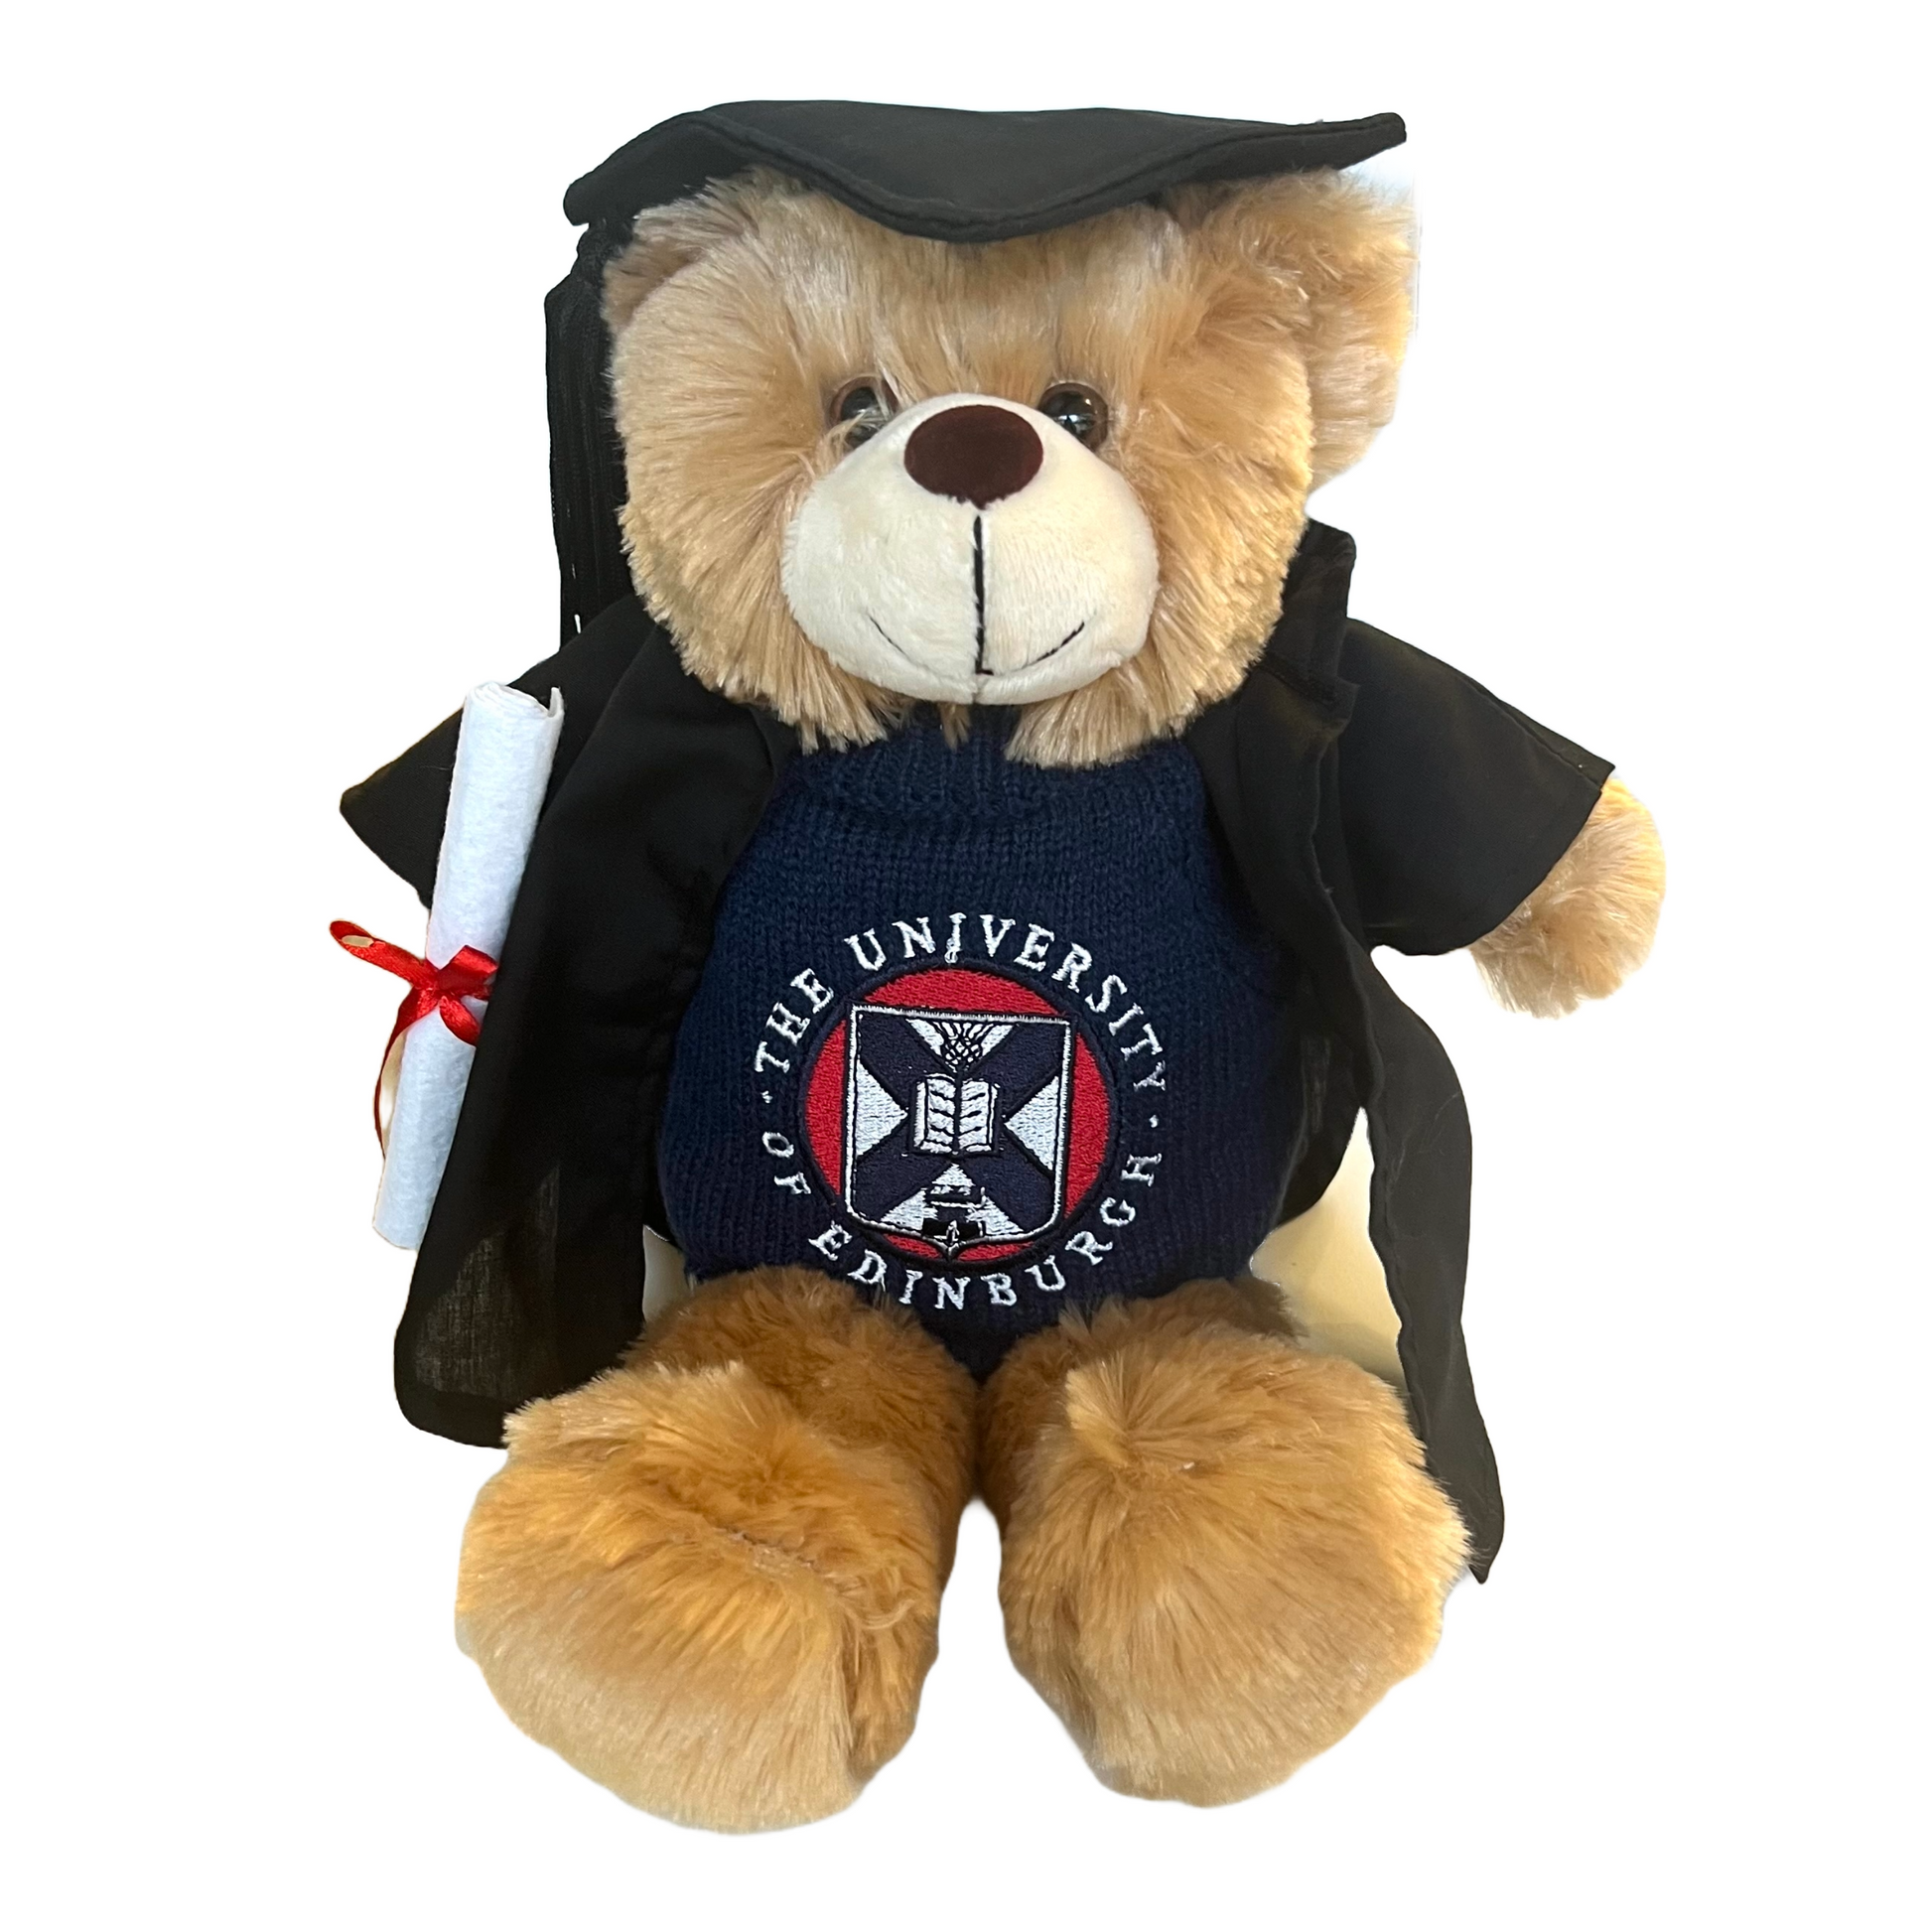 Brown teddy bear wearing knitted navy jumper with university crest embroidered, with graduation cap, gown and scroll